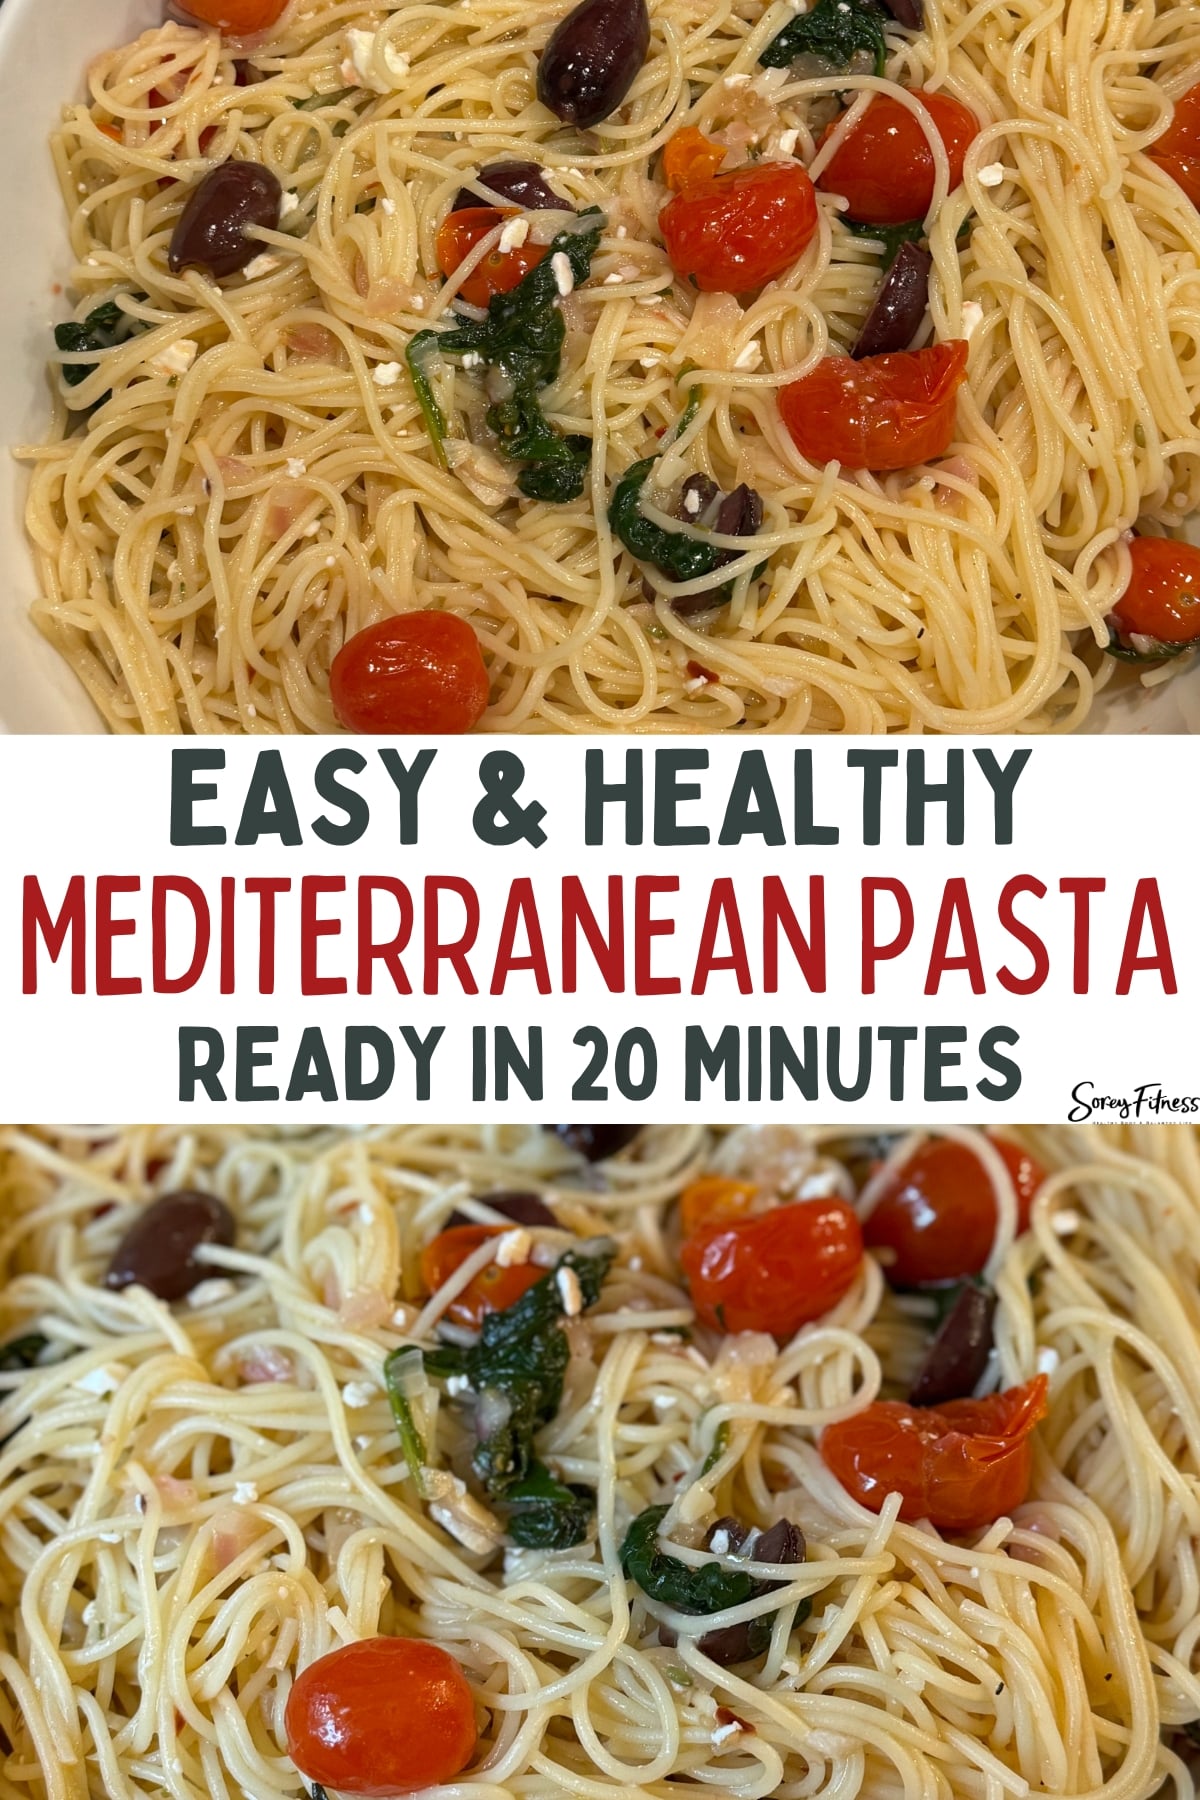 Collage of the pasta recipe - text overlay in the middle says easy & healthy mediterranean pasta read in 20 minutes